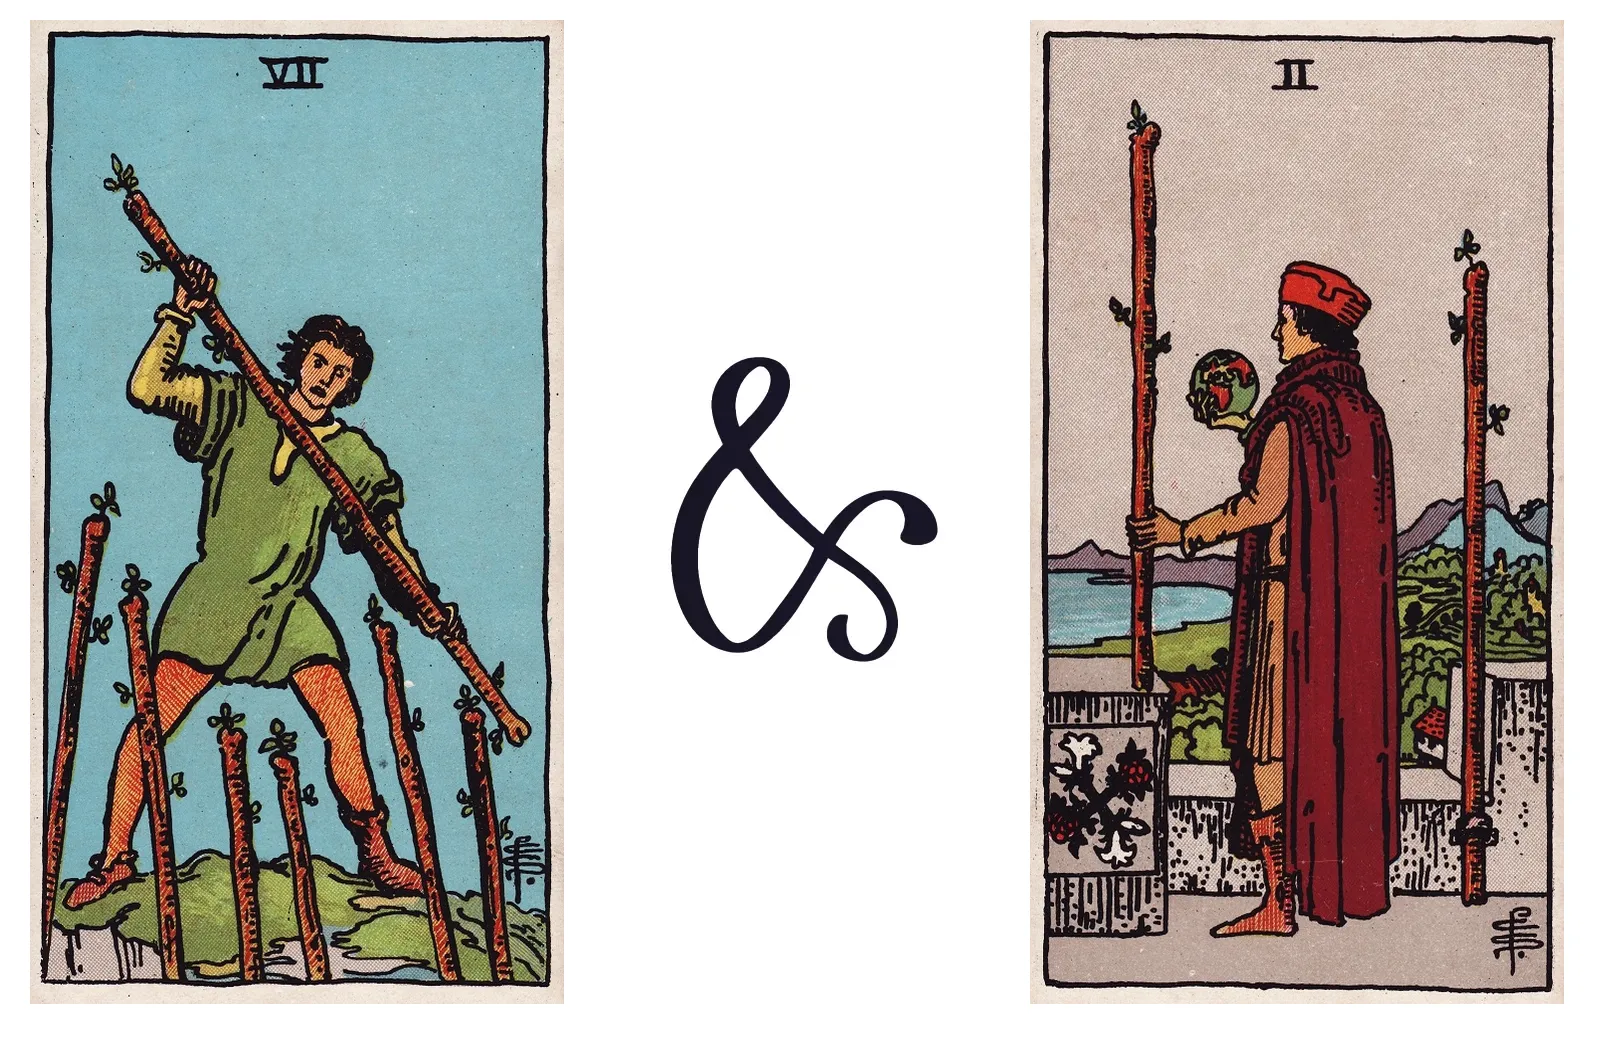 Seven of Wands and Two of Wands